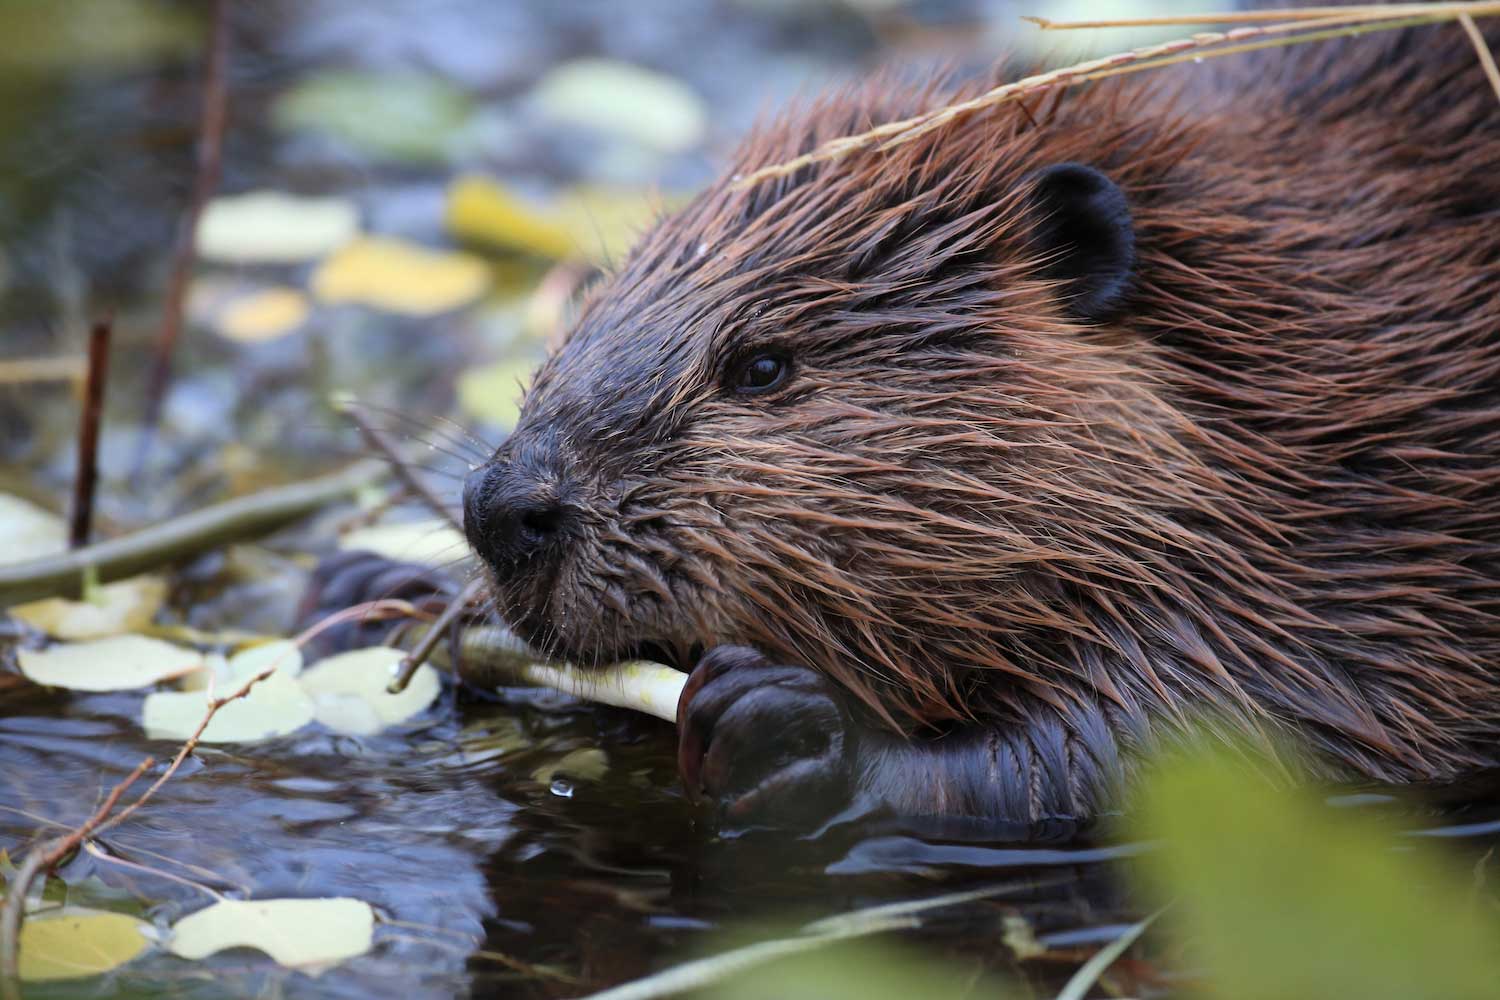 A beaver eating vegetation in the water.